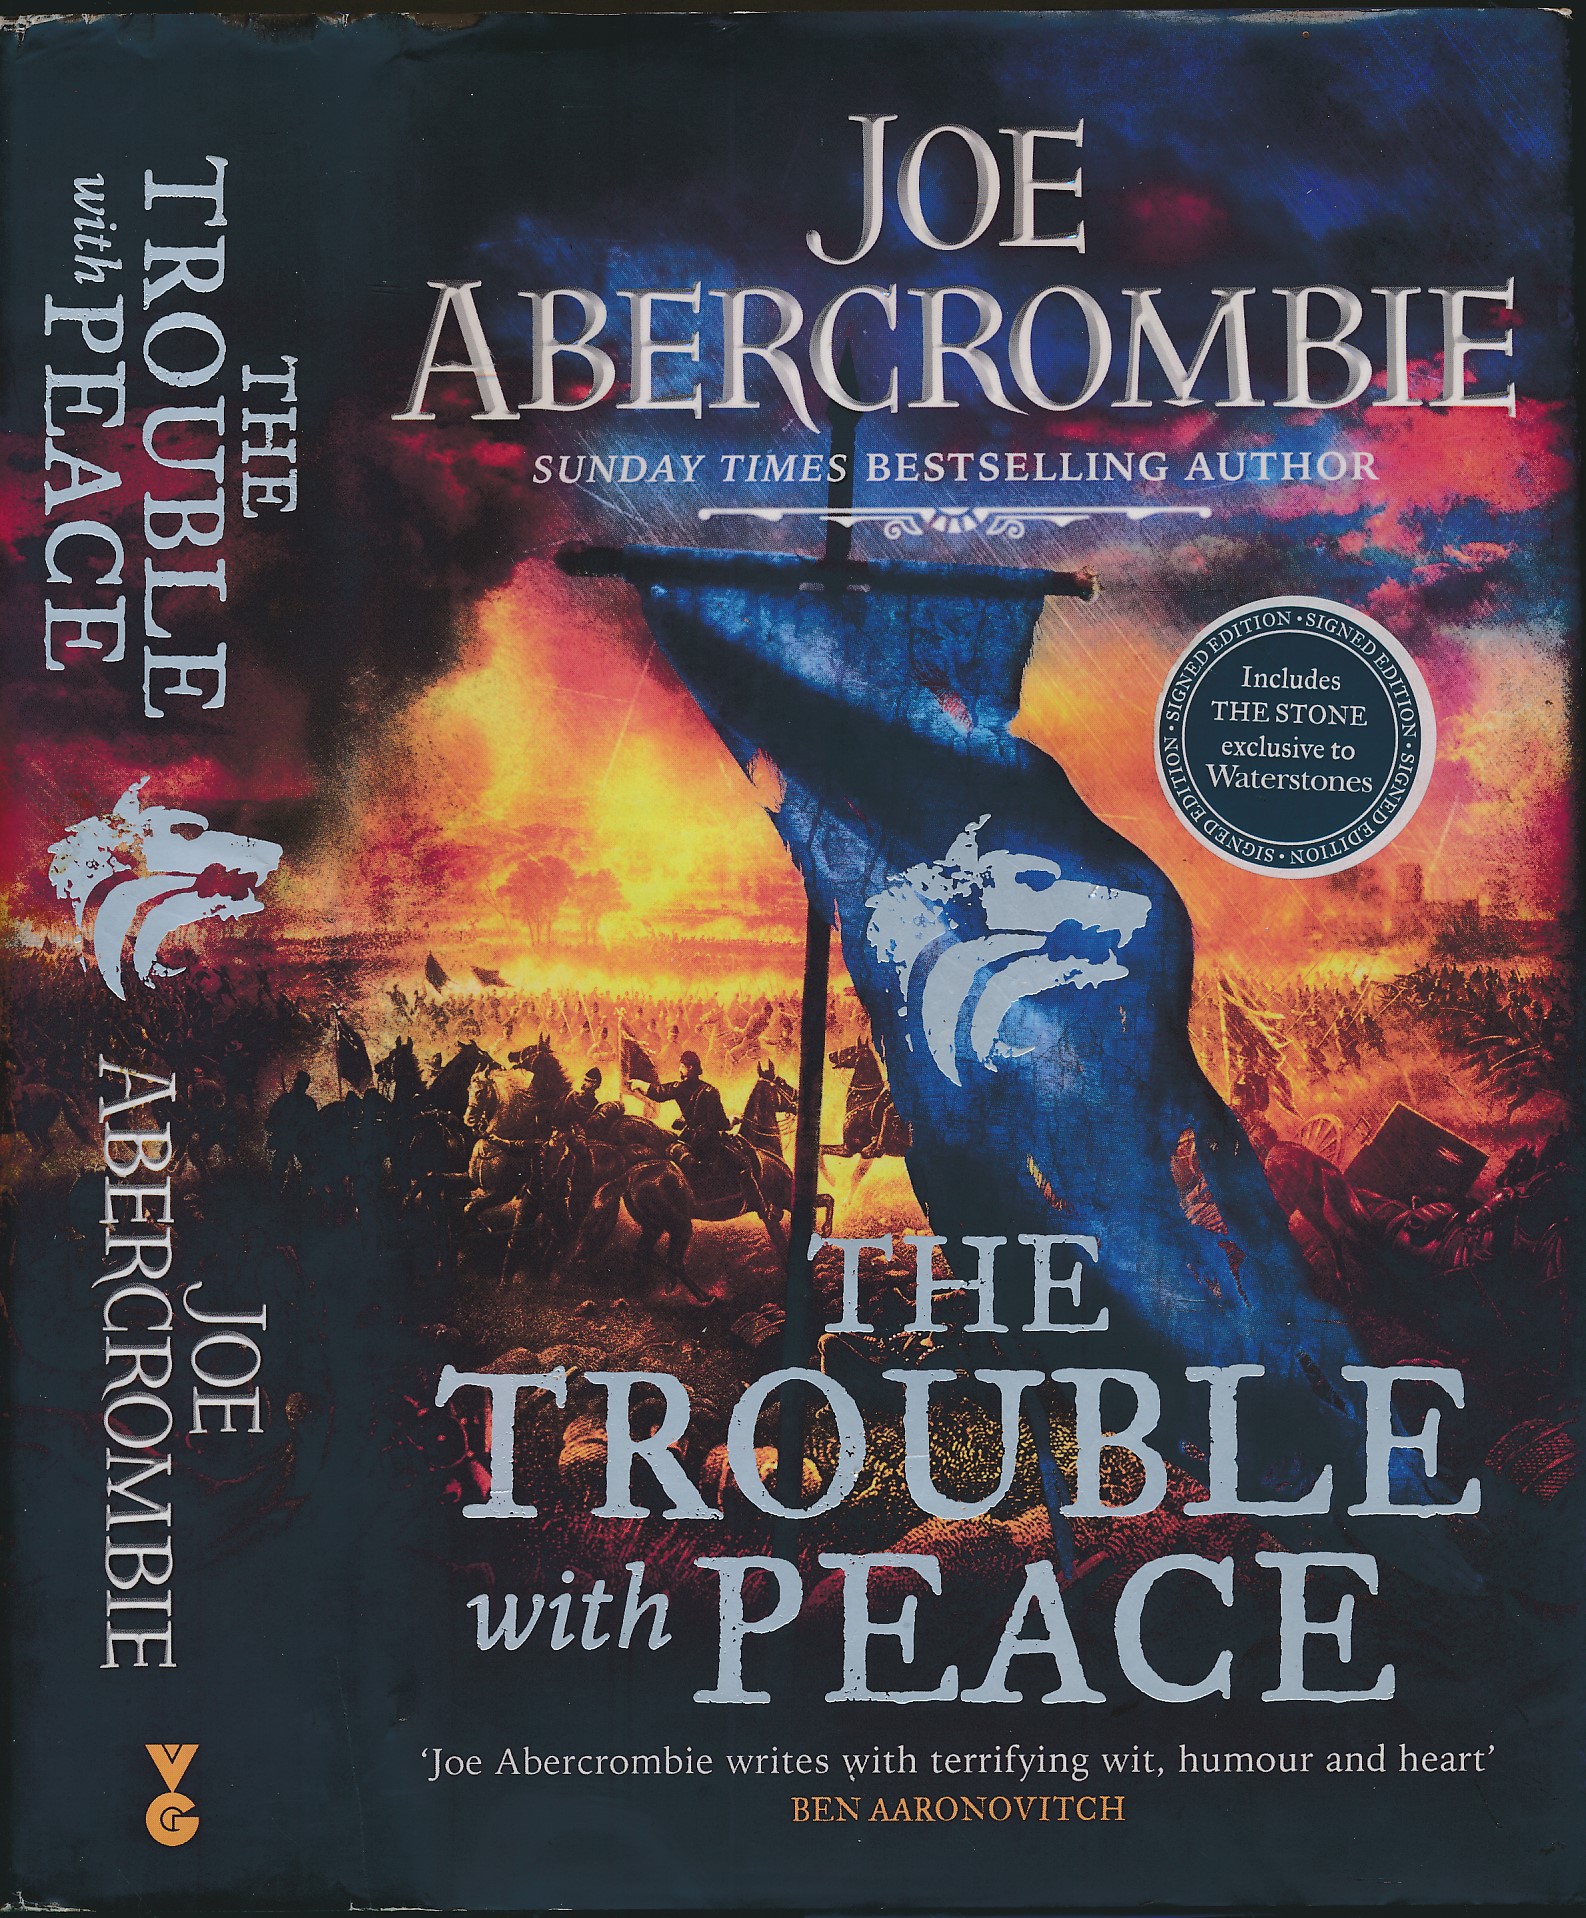 The Trouble with Peace. Signed copy.